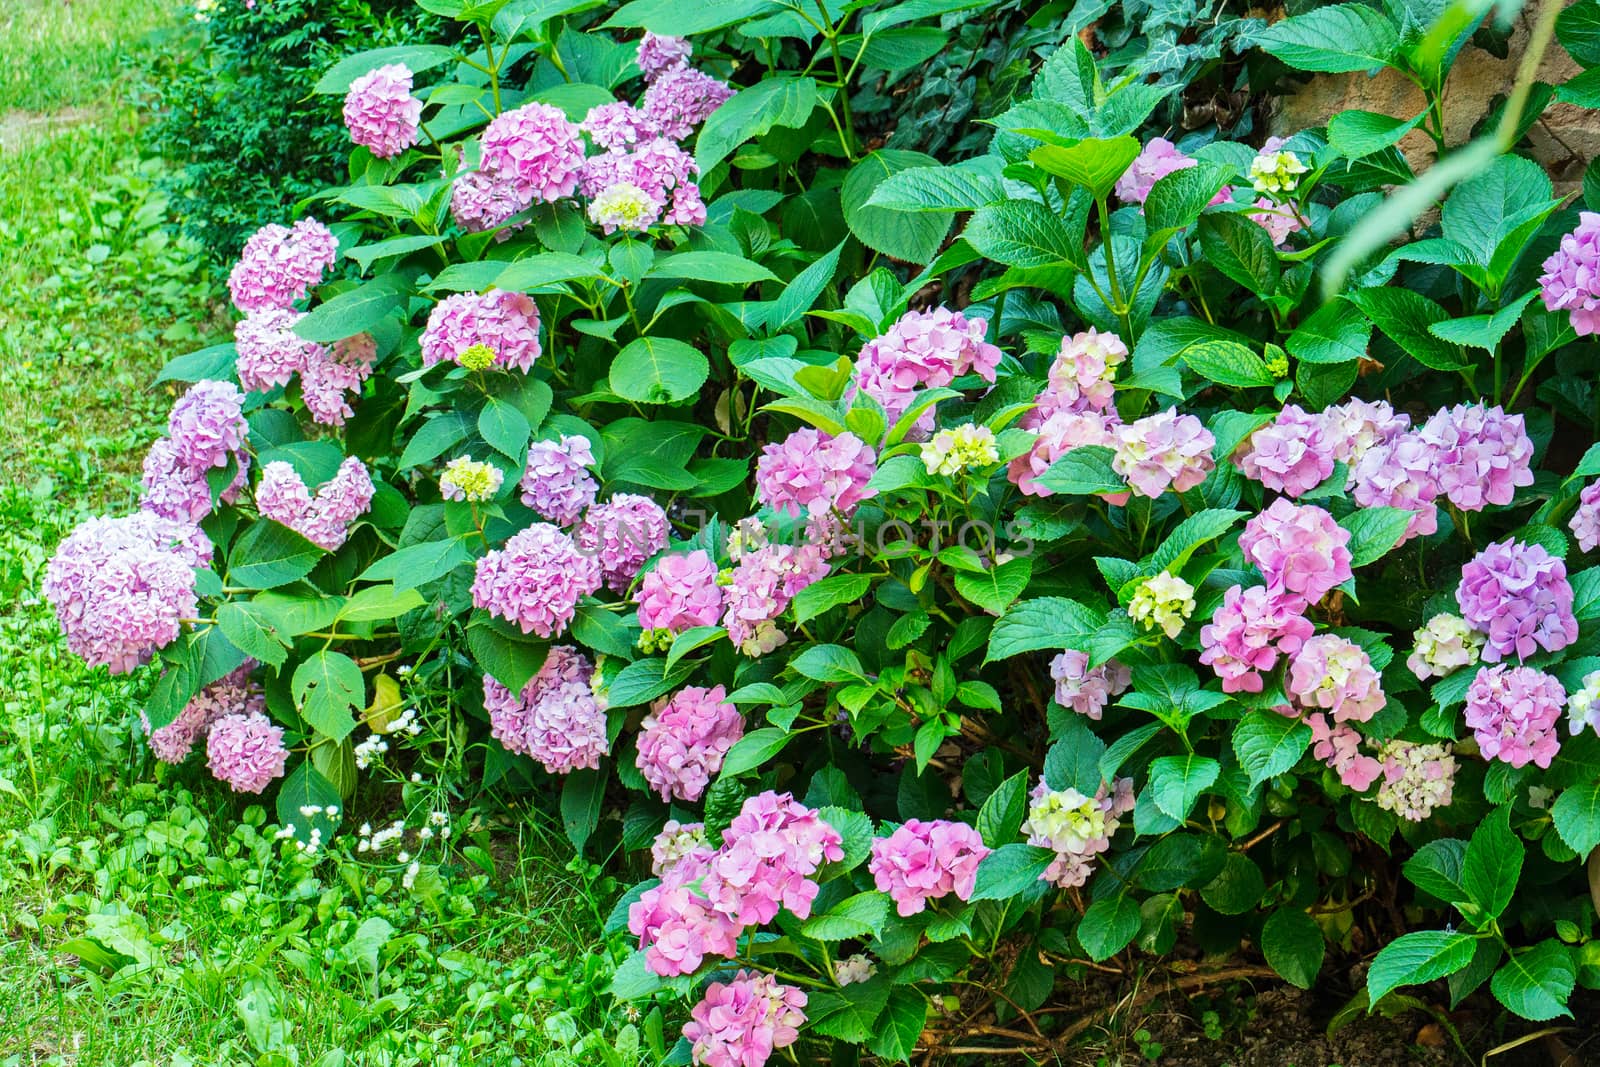 Beautiful bush with small flowers of pink color and green large leaves